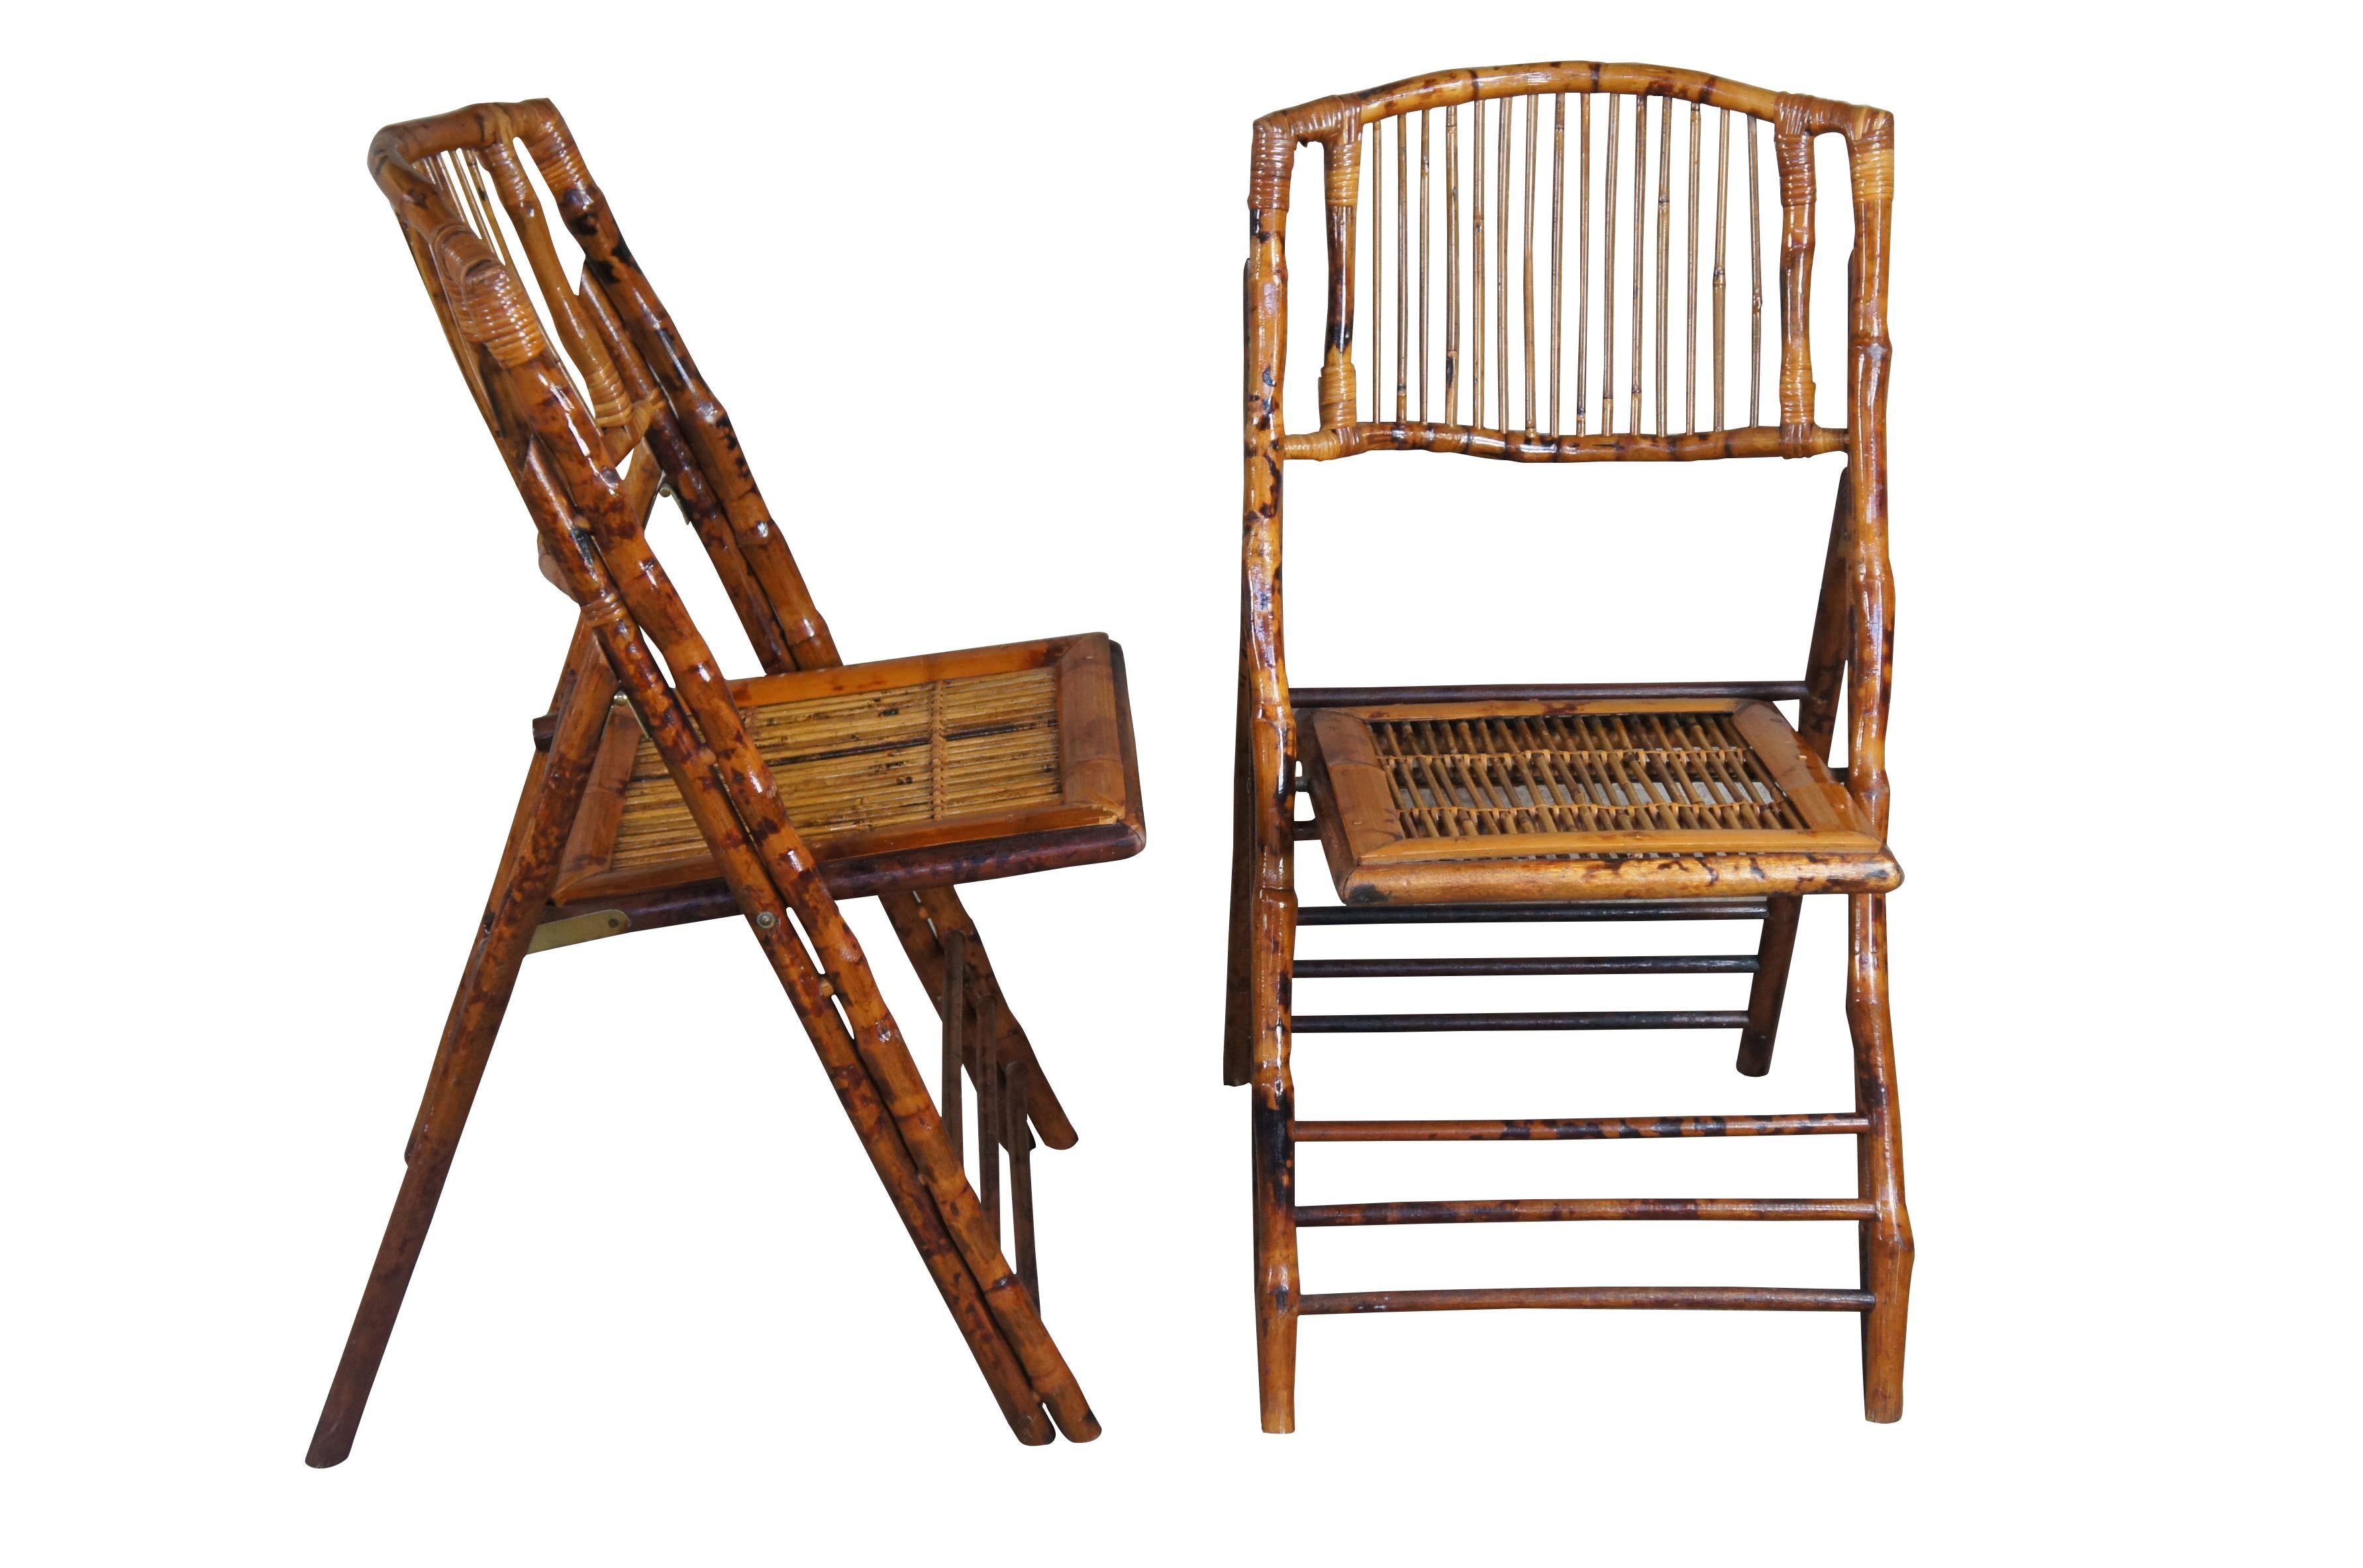 A set of 4 English vintage British Colonial style bamboo folding side chairs from the mid-20th century, with slatted backs and rattan accents. Charming us with their rustic presence and nice patina, this set of mid century bamboo folding side chairs